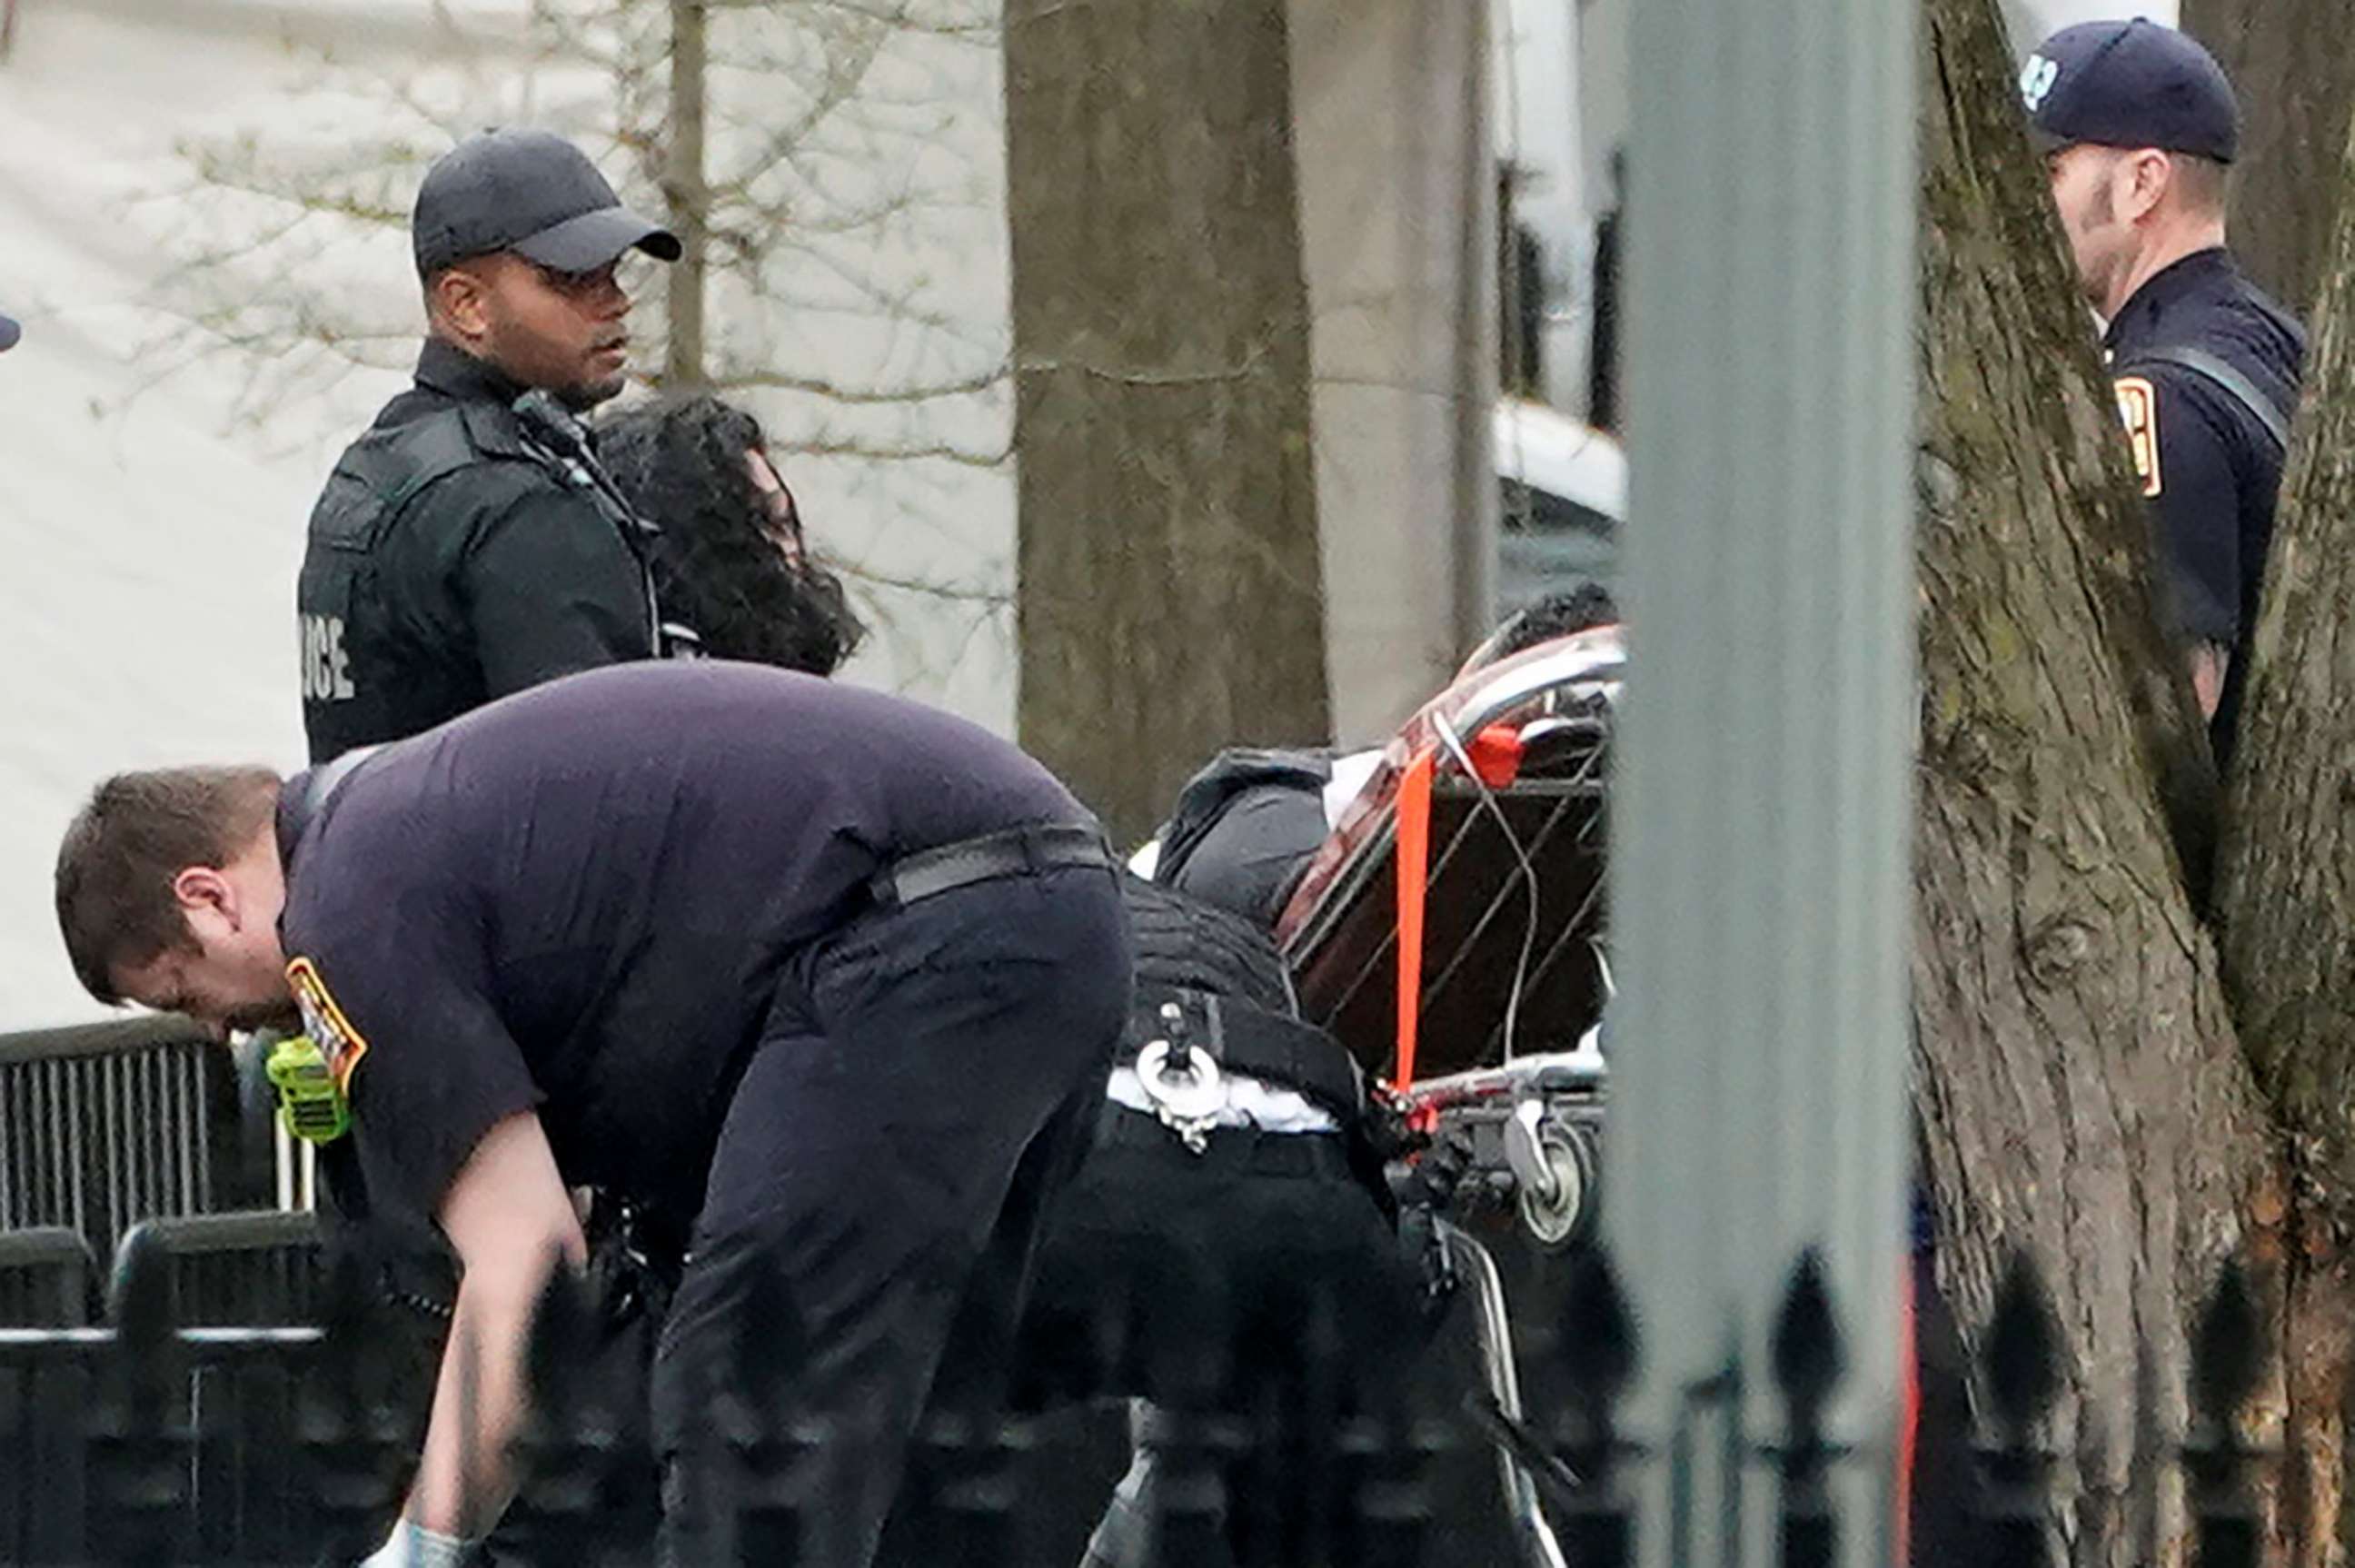 PHOTO: Police and rescue personnel remove a man on a stretcher from Lafayette Park after the man lit his jacket on fire in front of the White House in Washington, April 12, 2019.